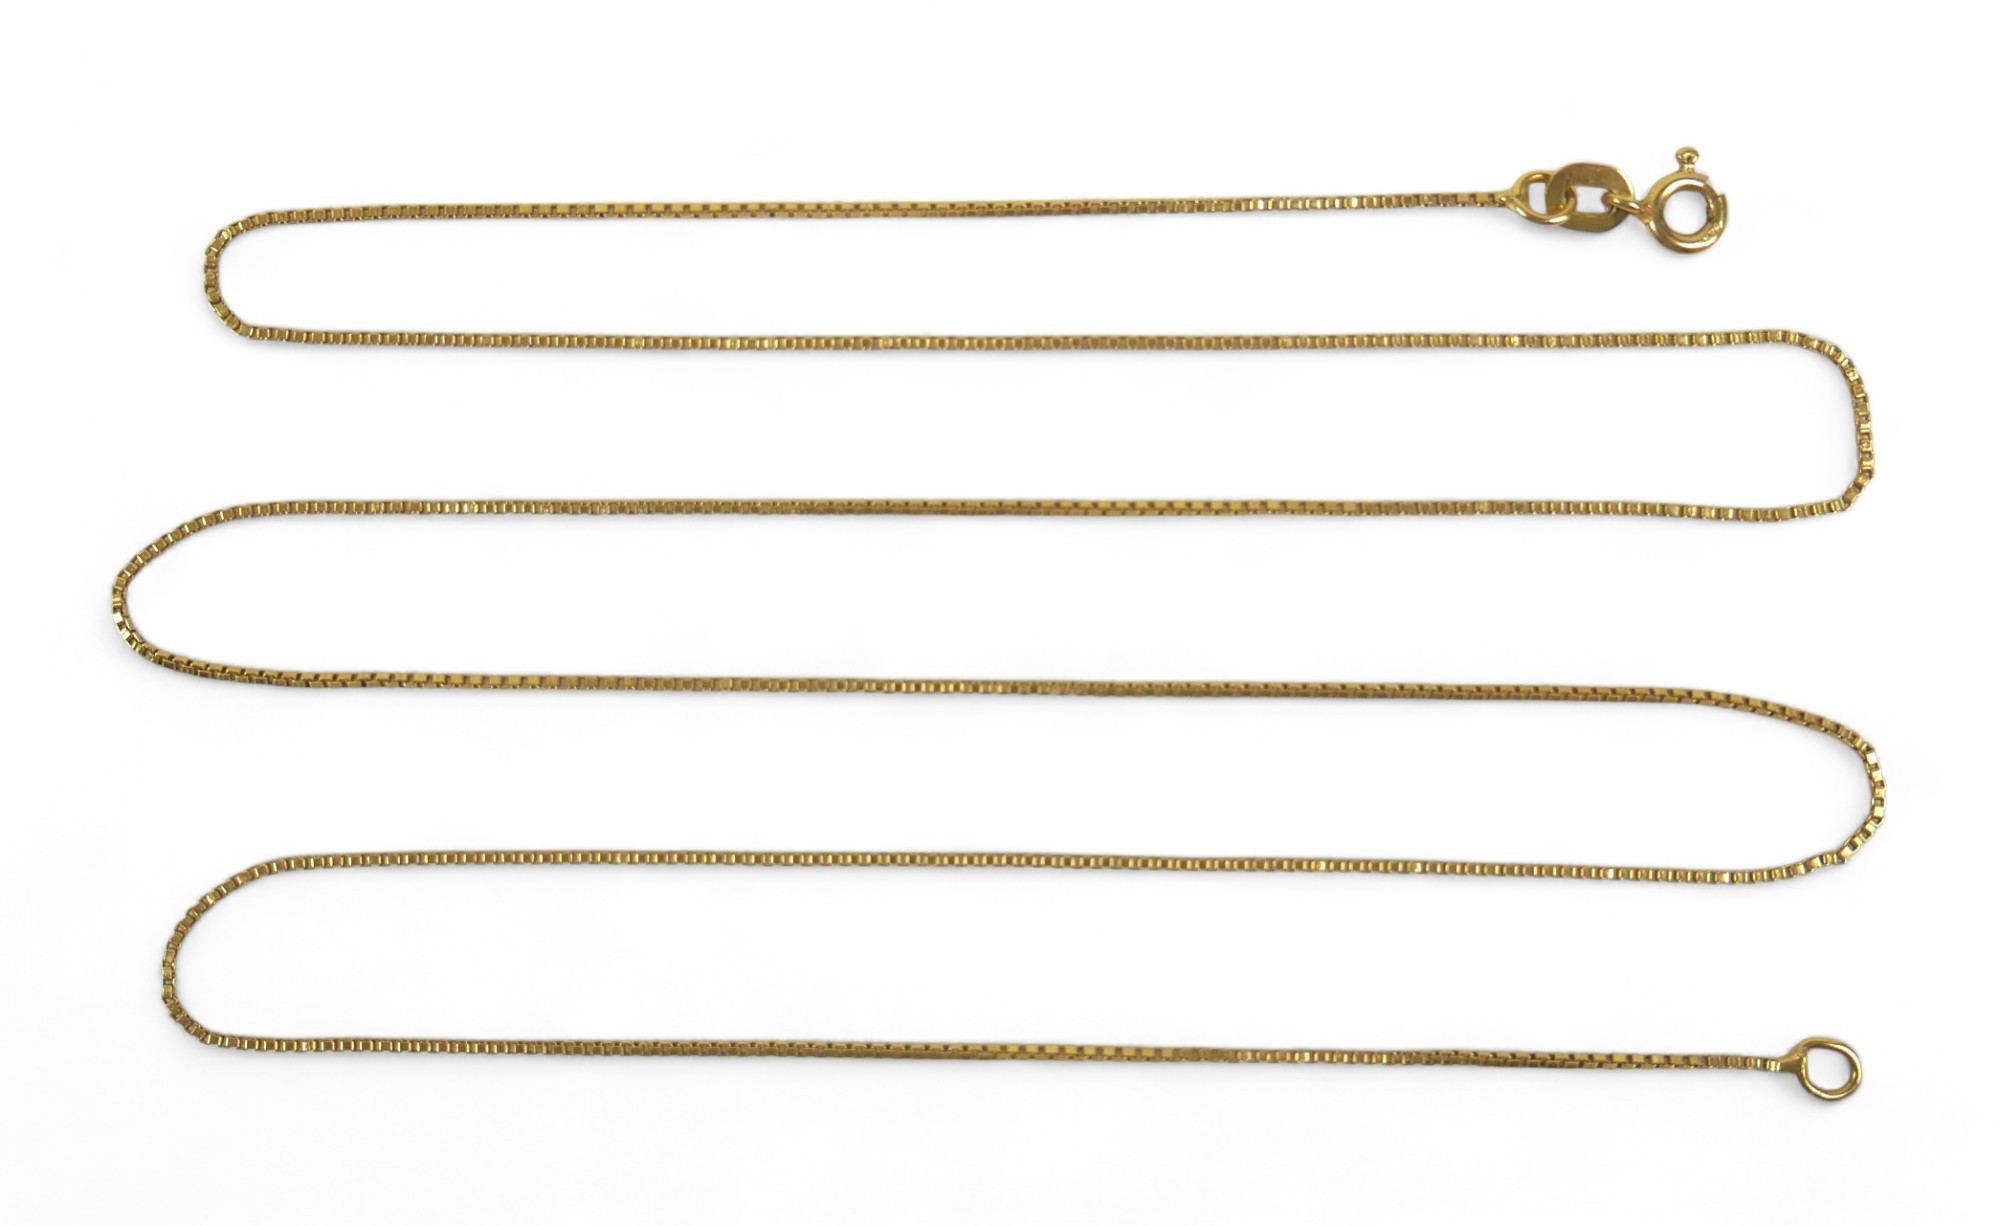 An 18ct yellow gold necklace, 3.6g, 60cm long by 0.8mm.